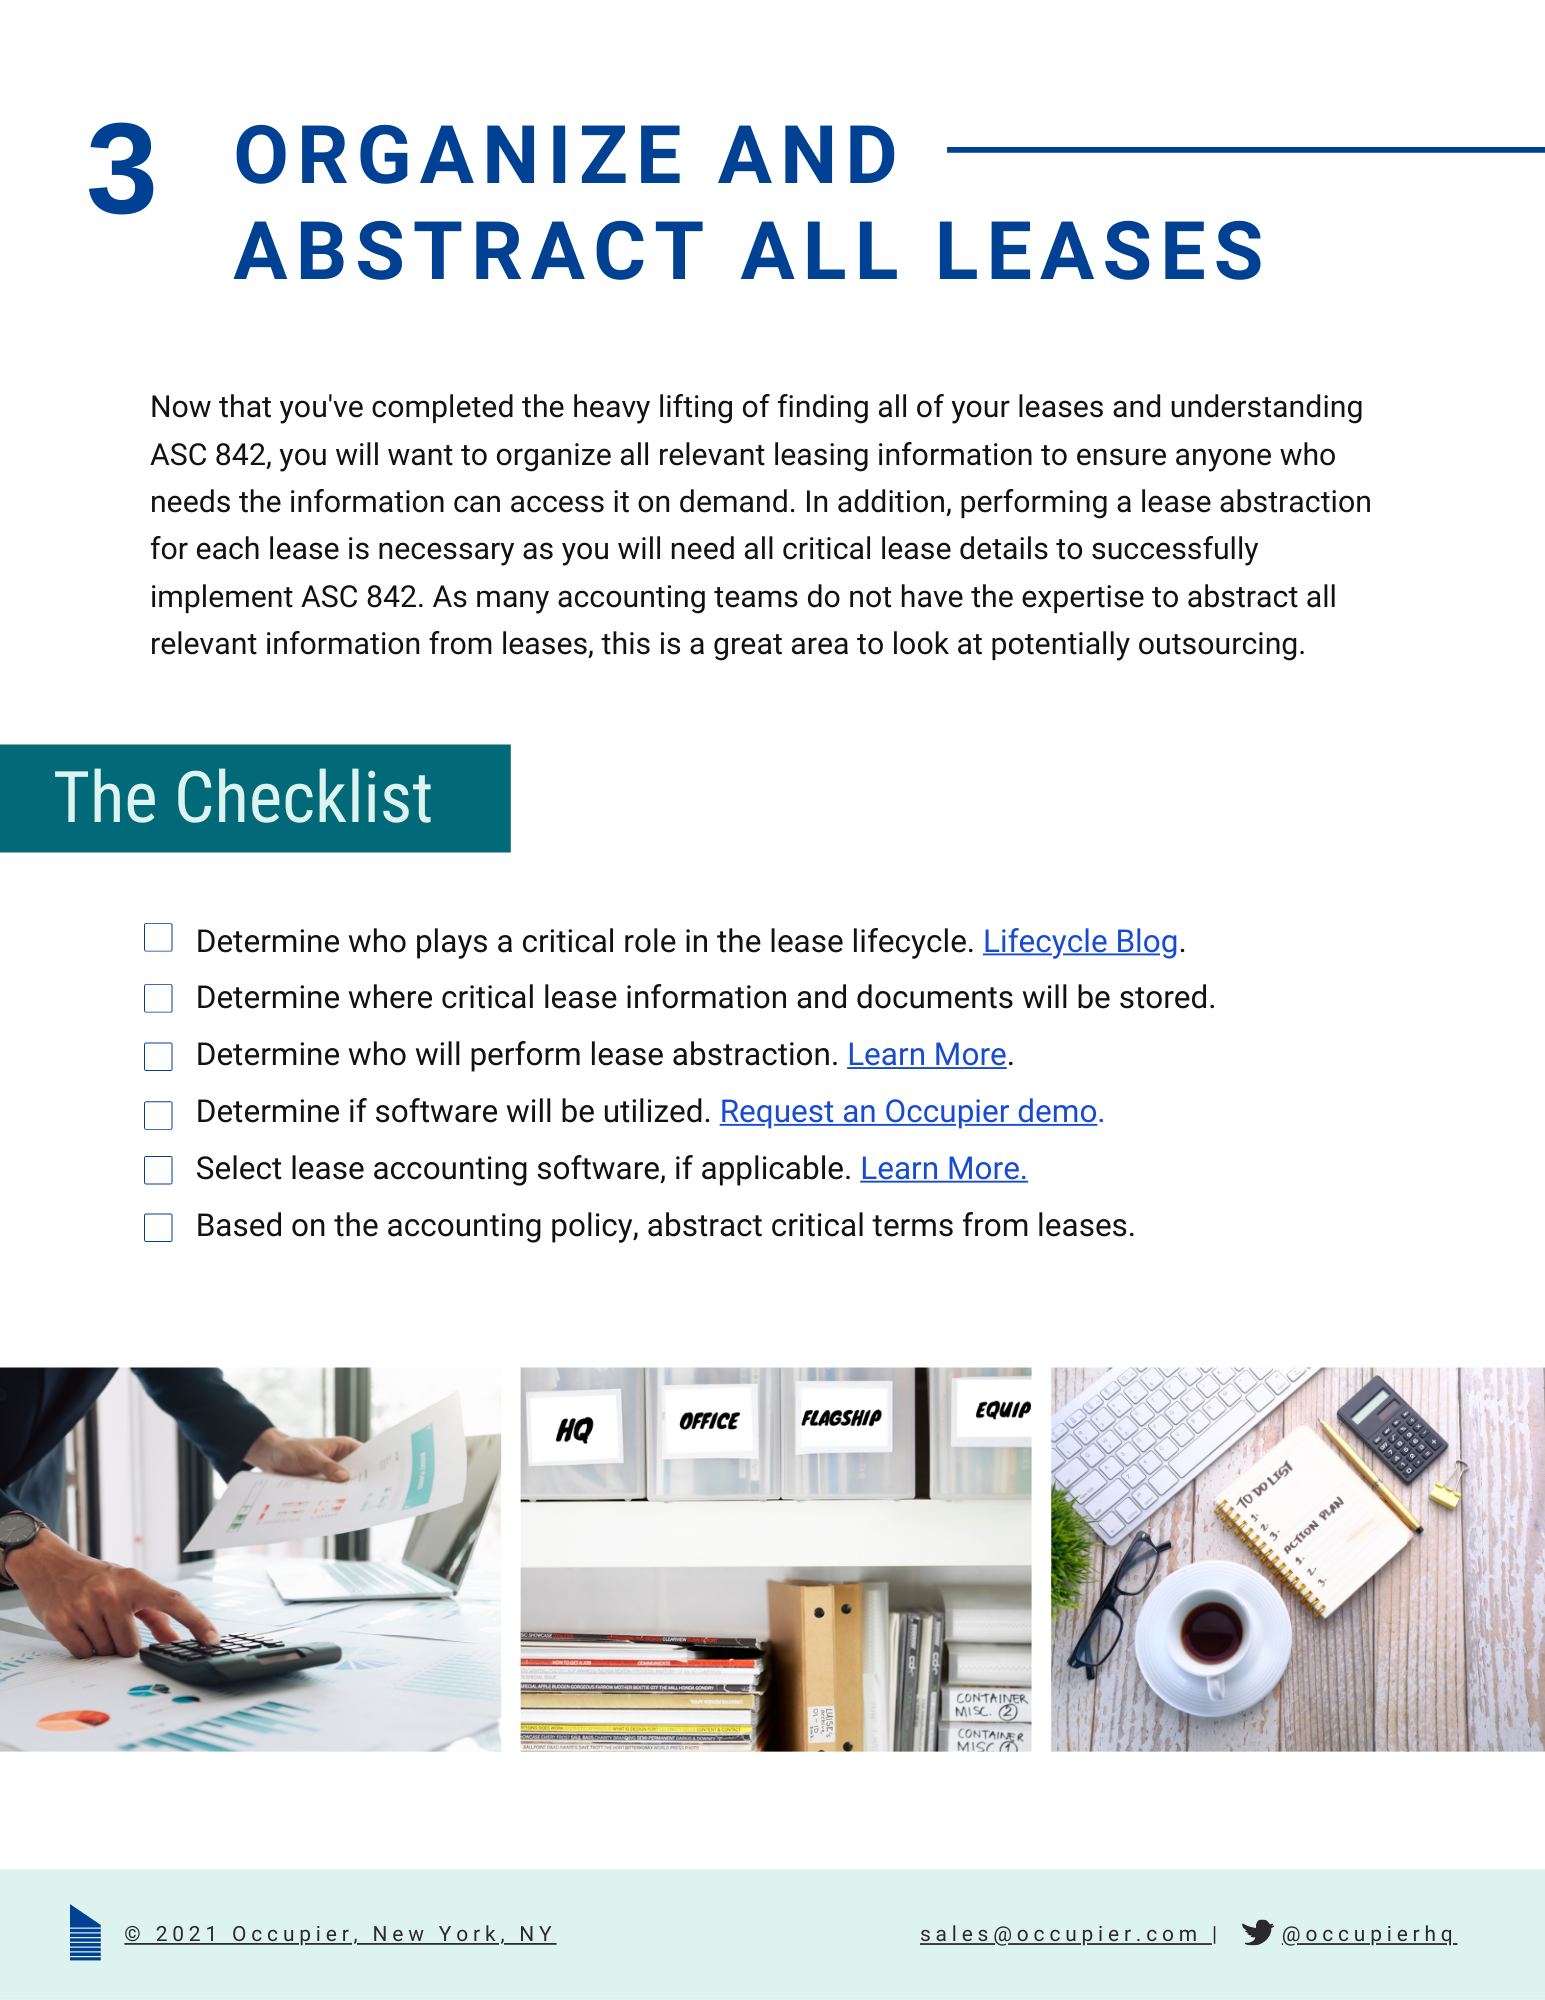 organize and abstract all leases